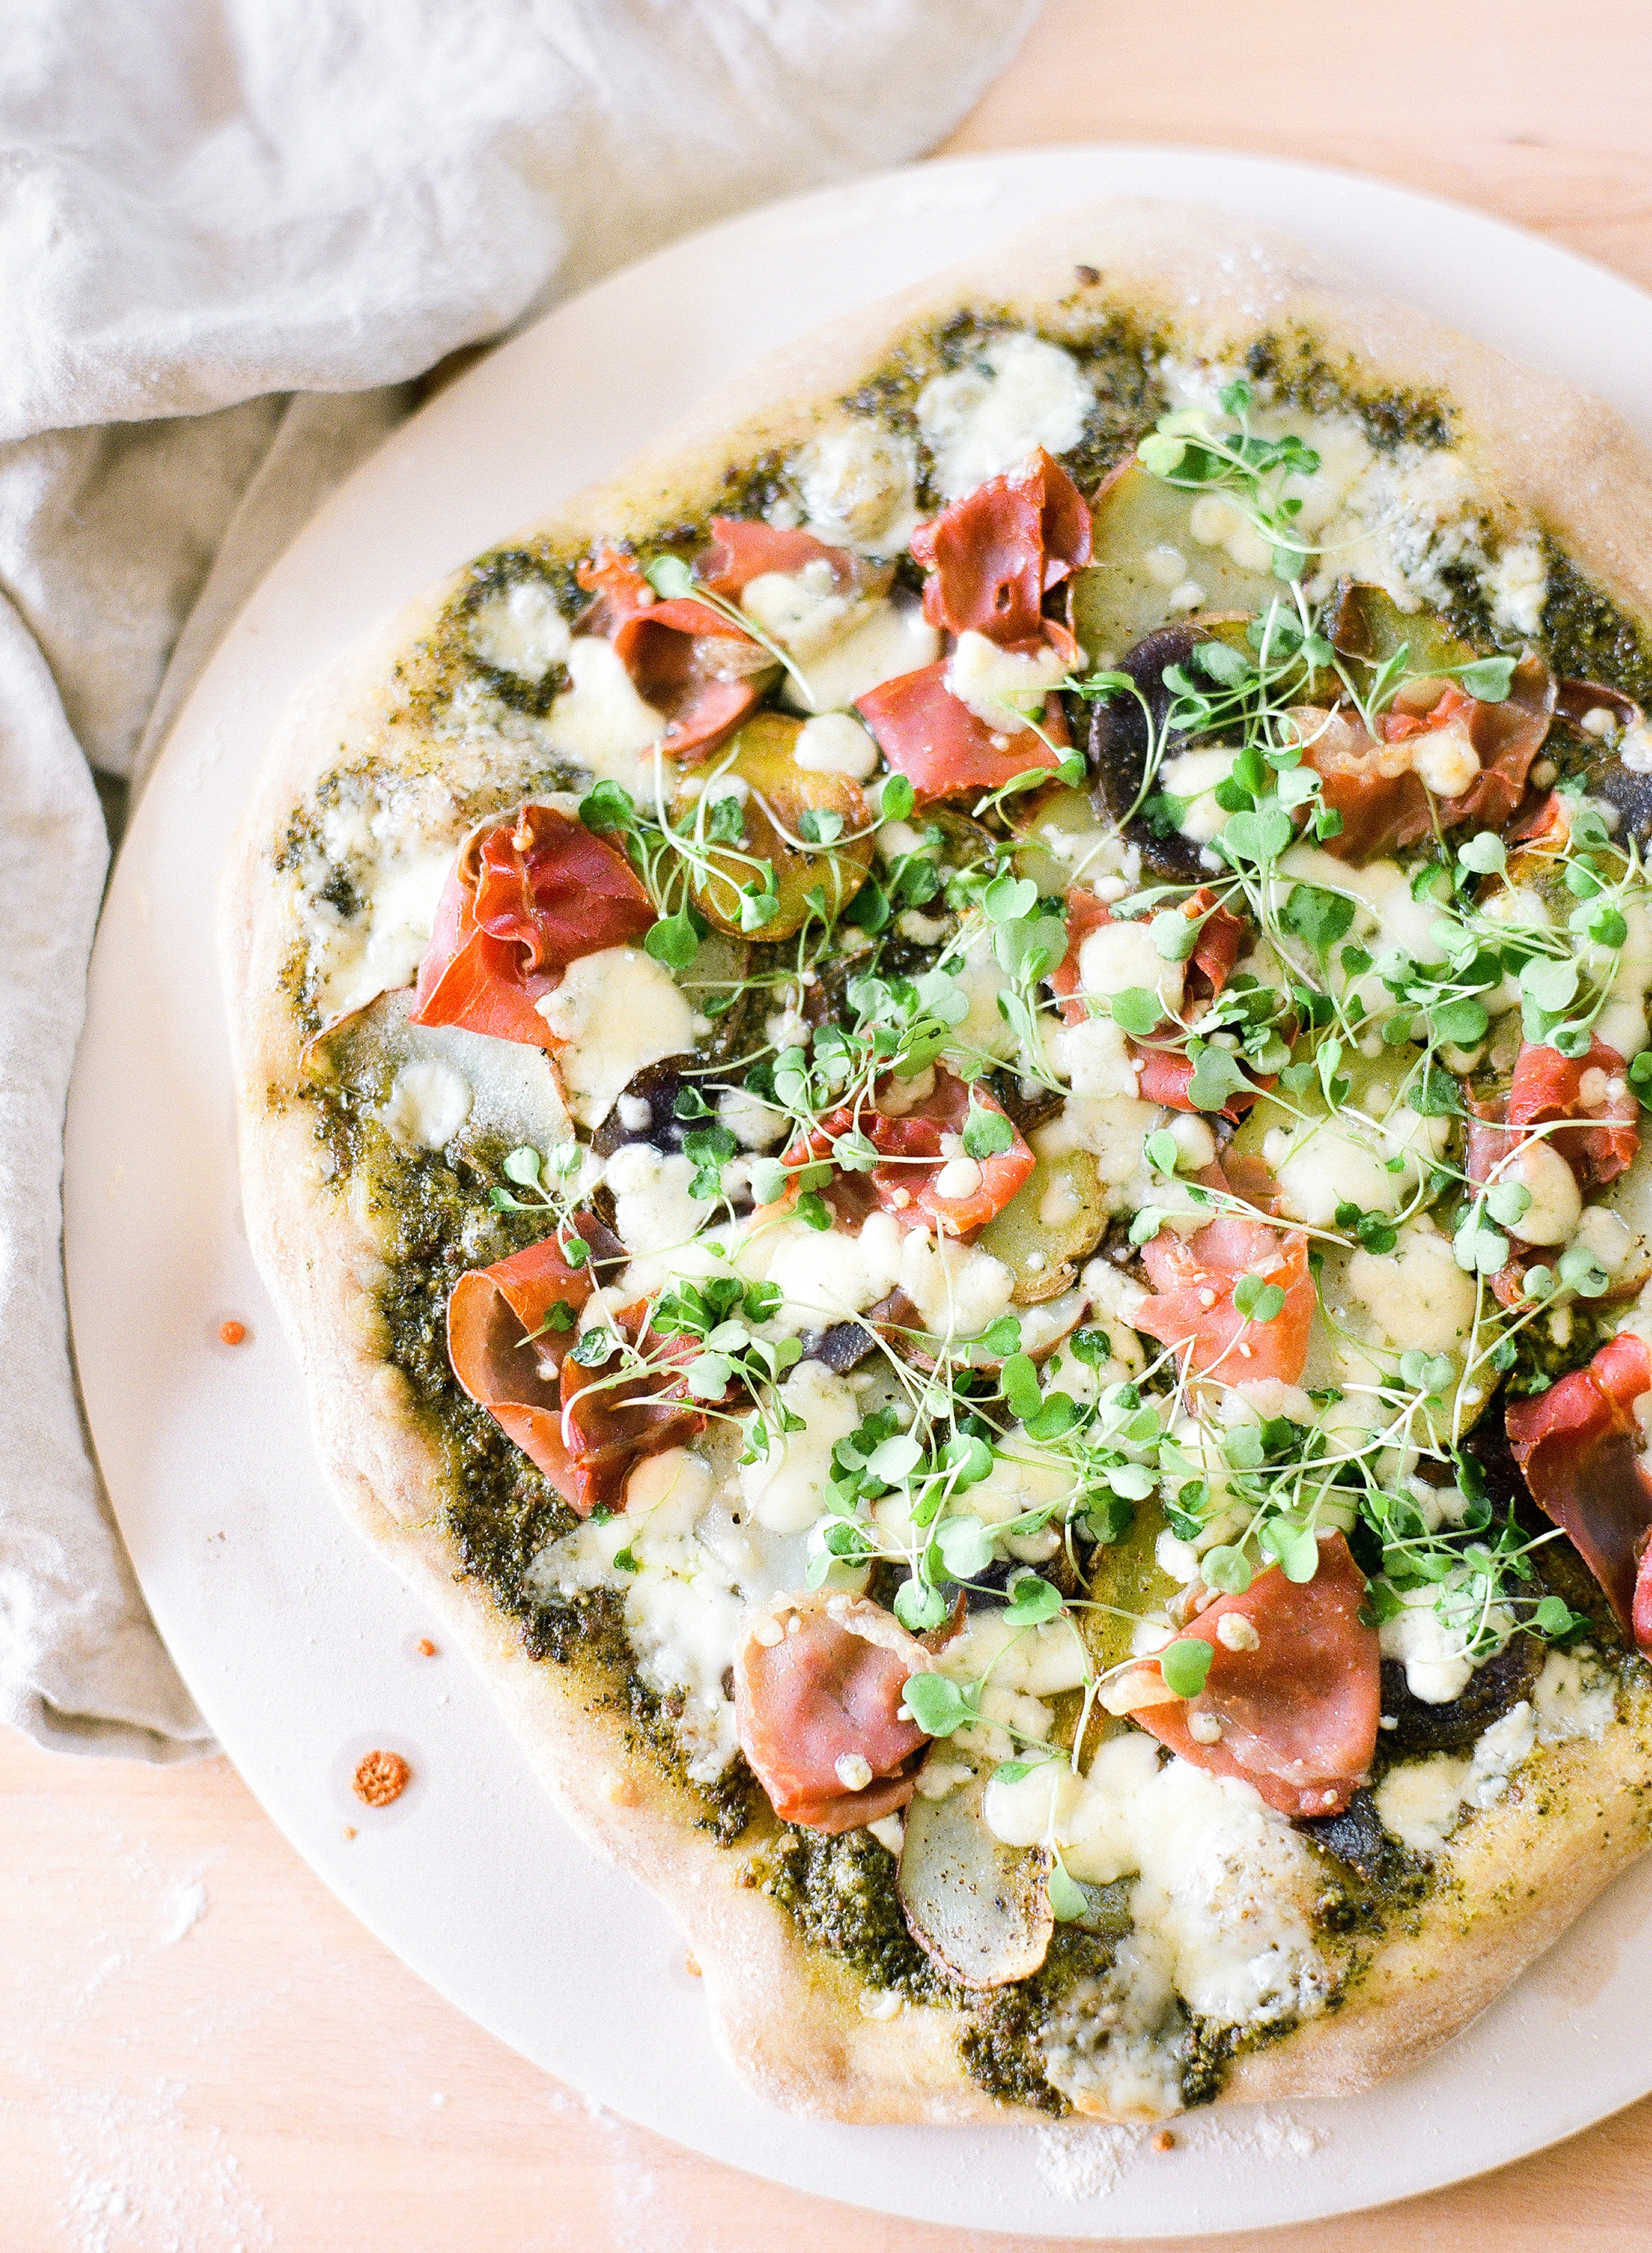 Date Night In - Make Your Own Pizza